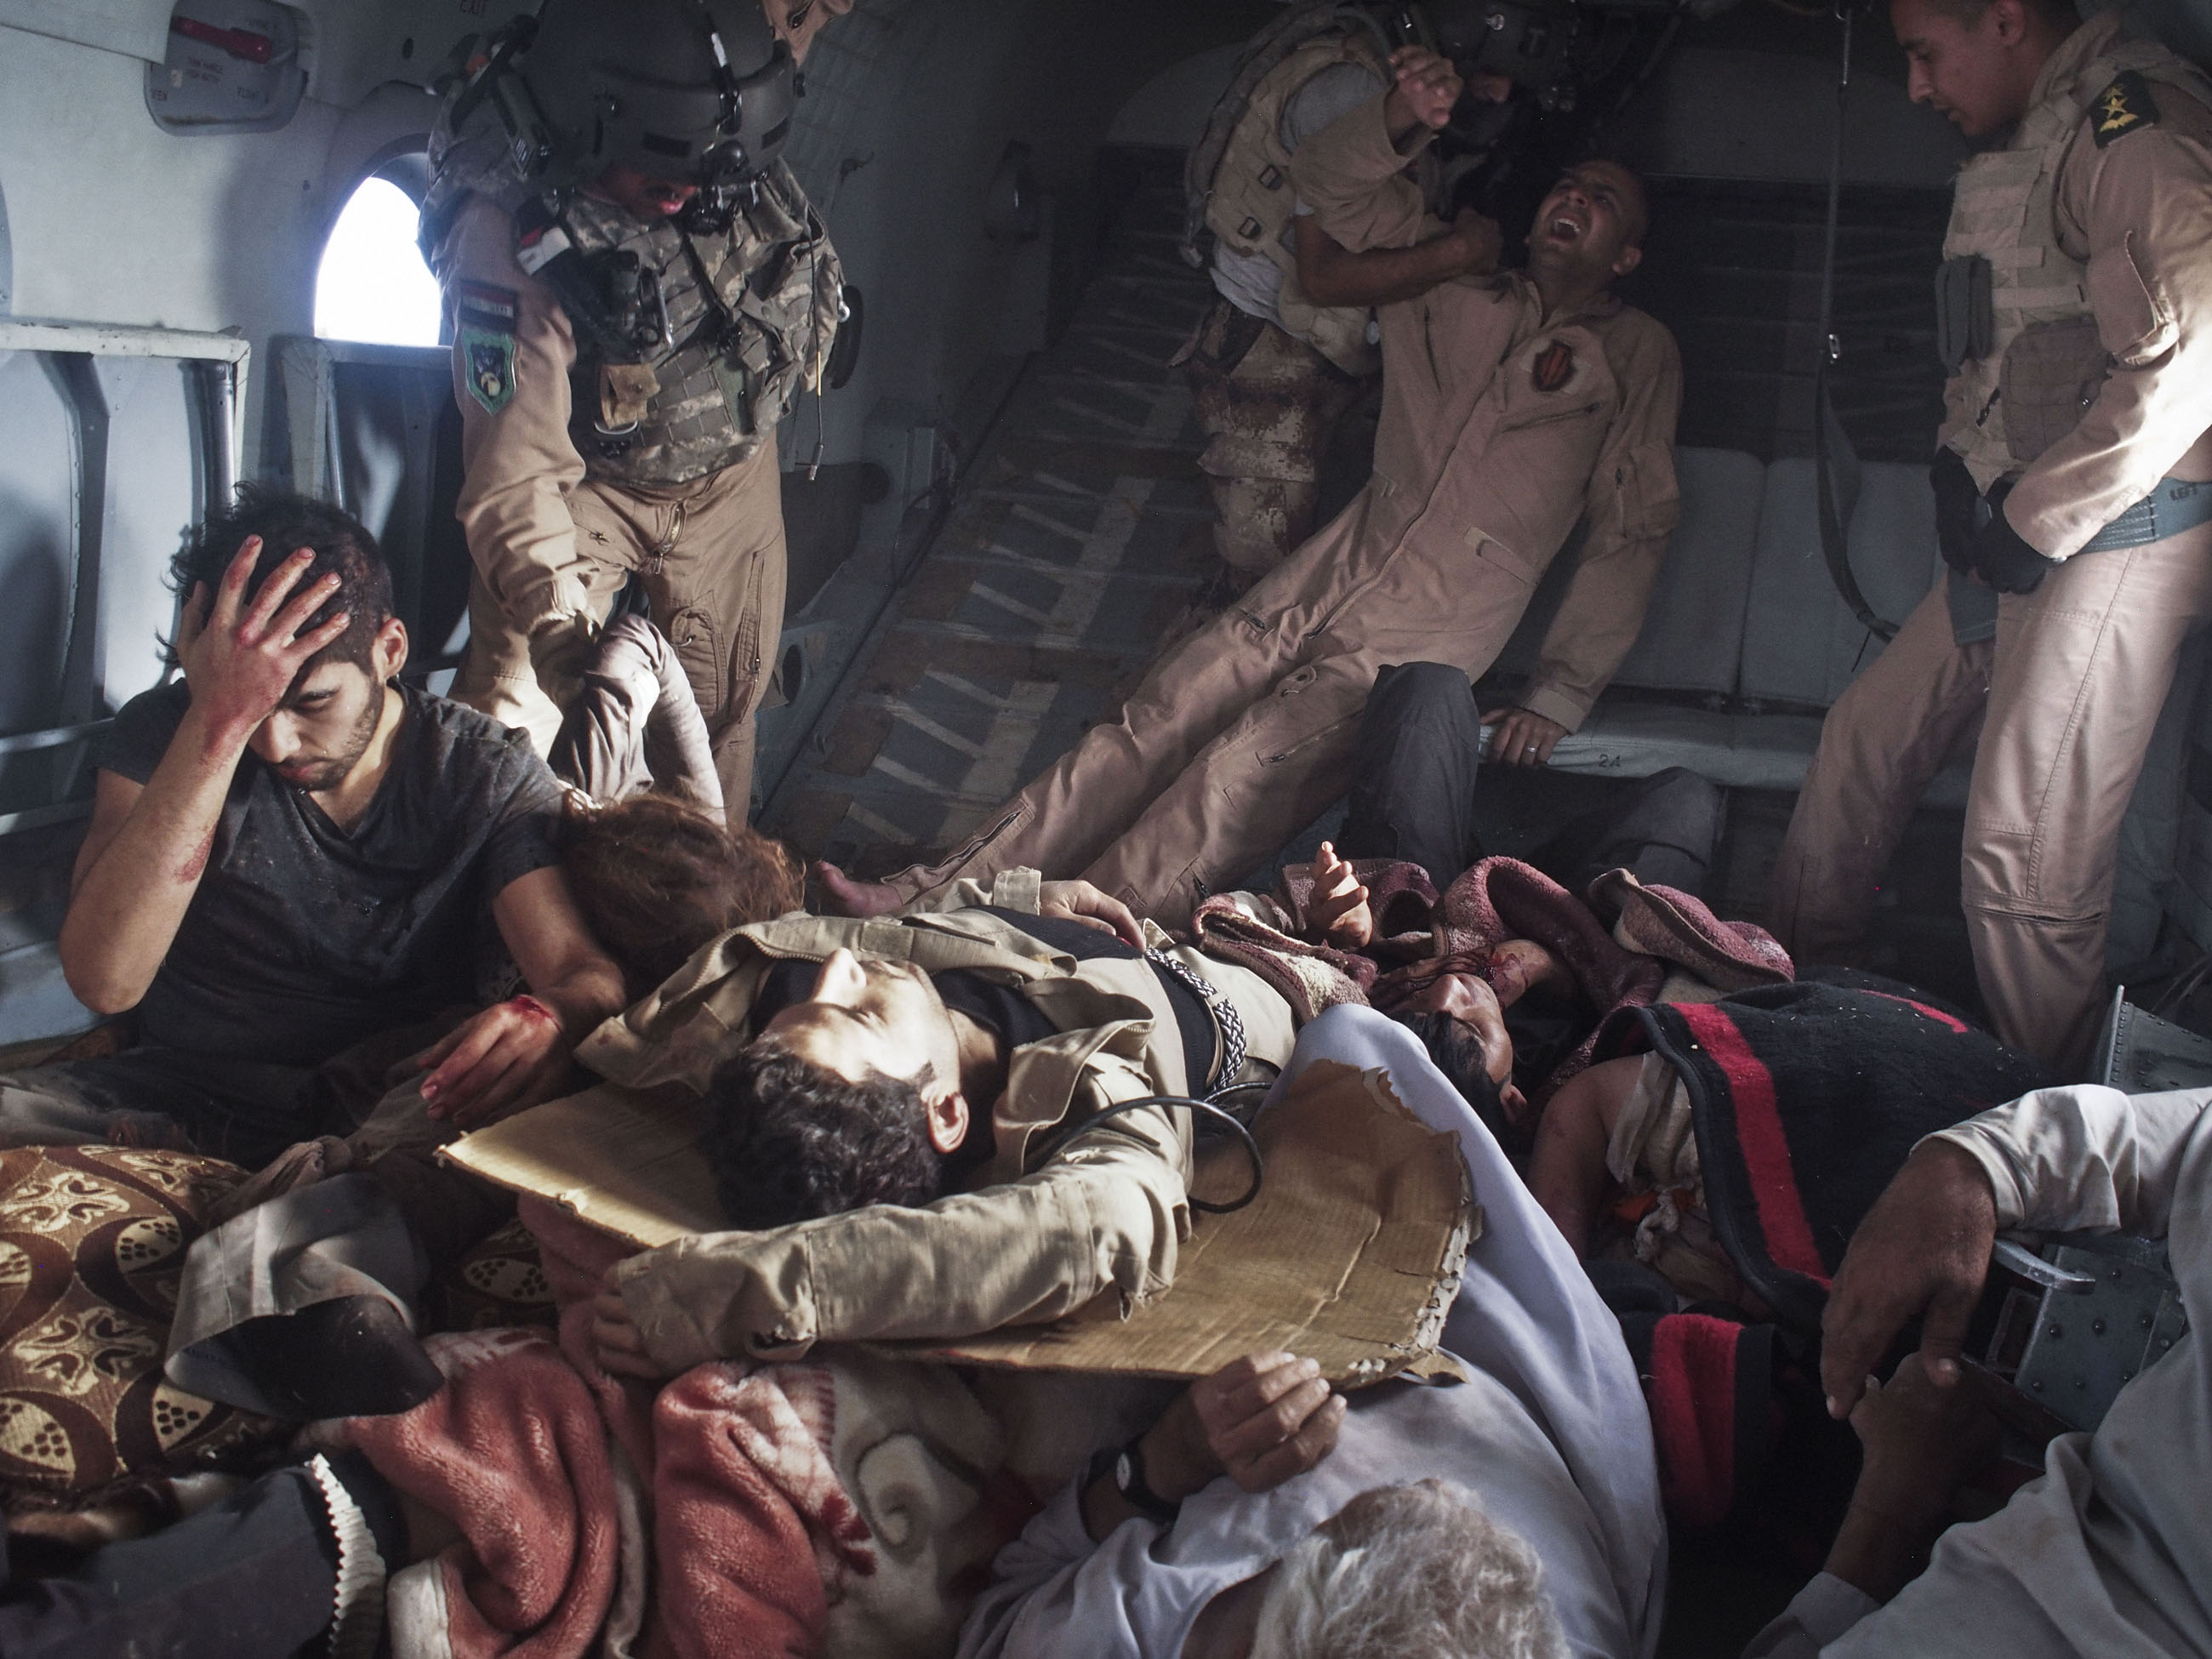 Injured survivors of an Iraqi Air Force helicopter crash in Mount Sinjar lie onboard a rescue helicopter on its way to Iraqi Kurdistan. The survivors included Yazidi civilians, Kurdish and Iraqi Army personnel, and journalists. Sinjar Mountains, Iraq, Aug. 12, 2014.